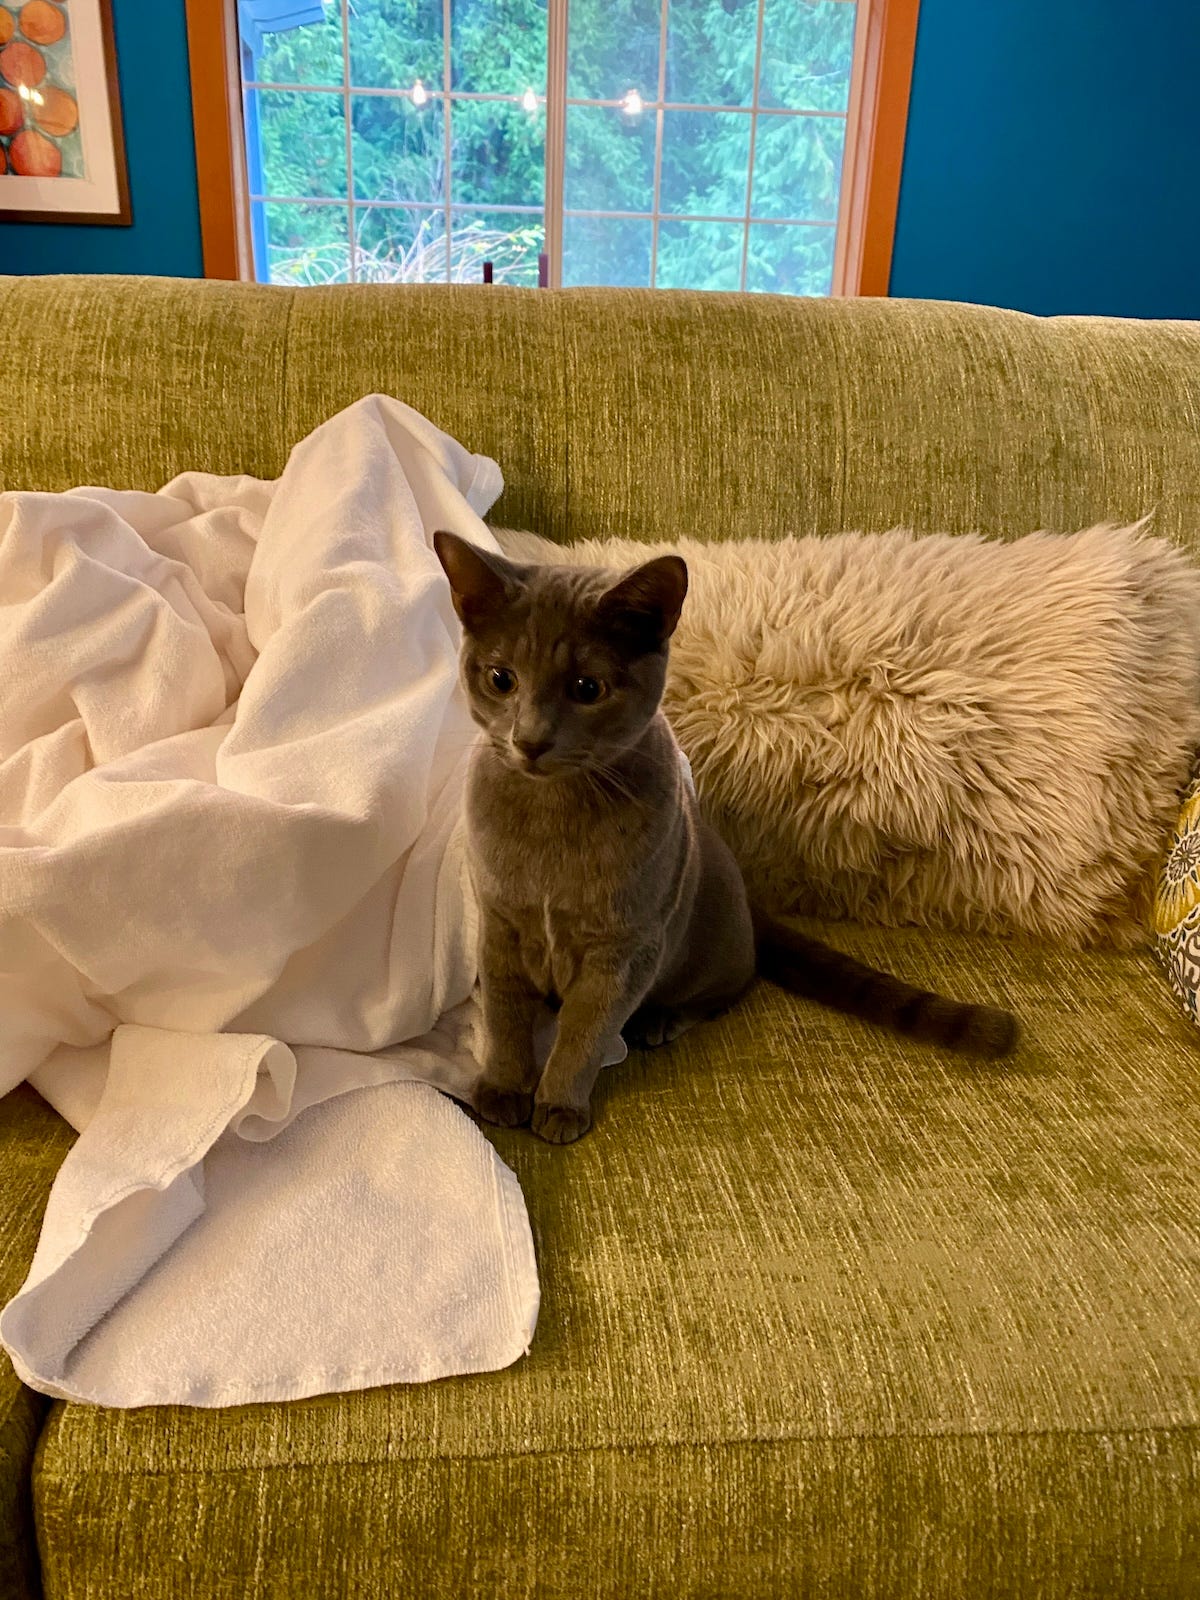 A small gray cat sits on a pale green couch against a fluffy pillow and a white towel.